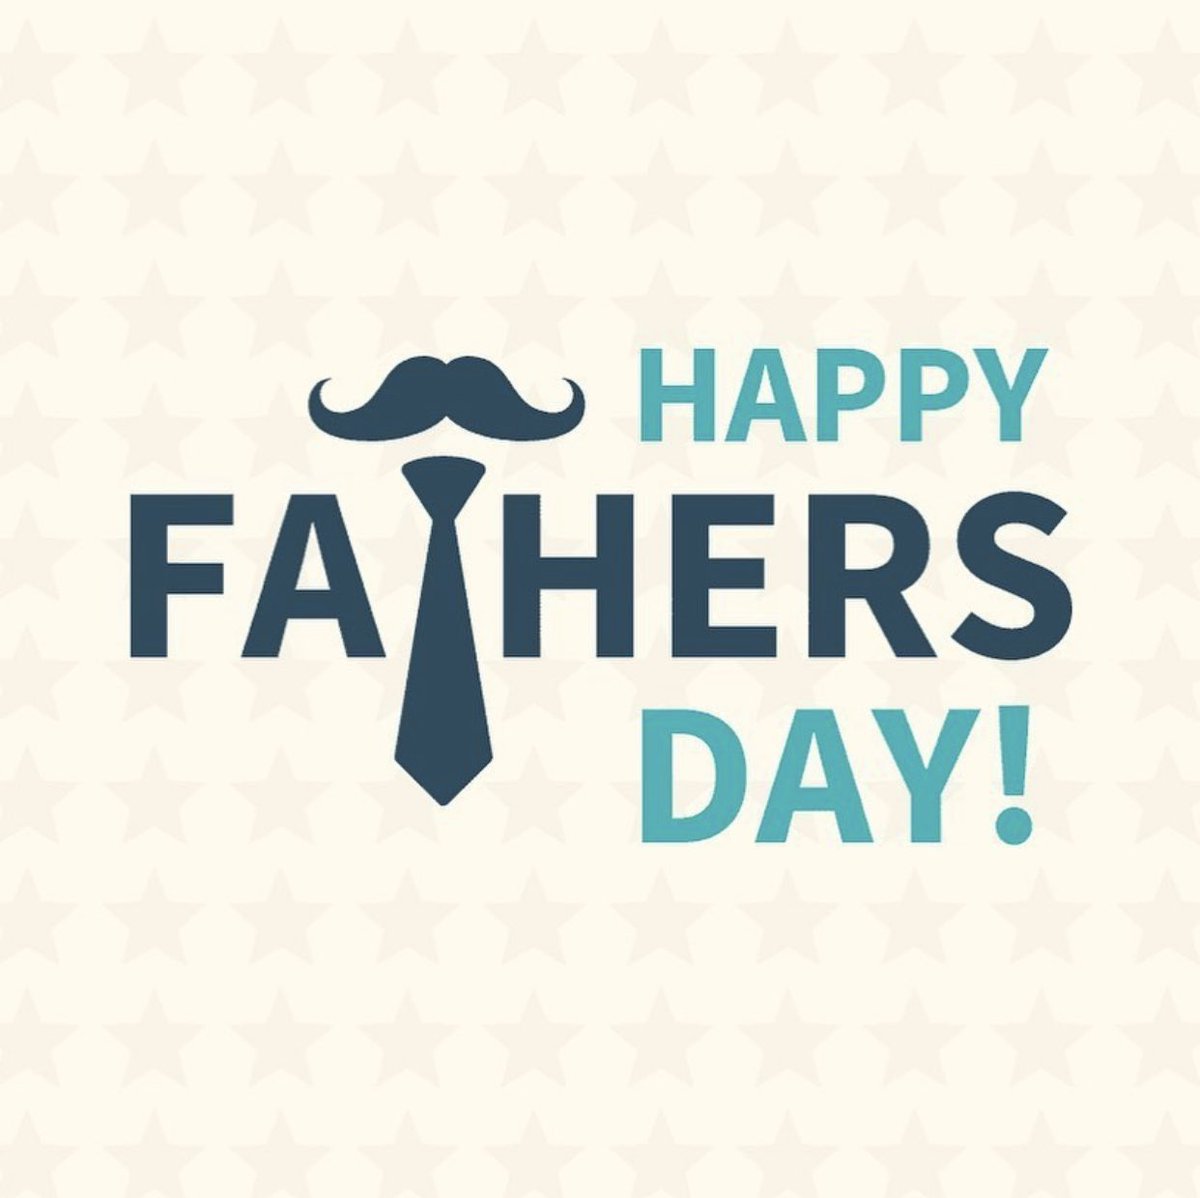 Happy Fathers Day!

God will give you the strength, wisdom and resources to be great men and even better fathers. #RCCGJHS #HappyFathersDay #FathersDay2020 #MenOfValour #OurYearOfGraceAndGlory